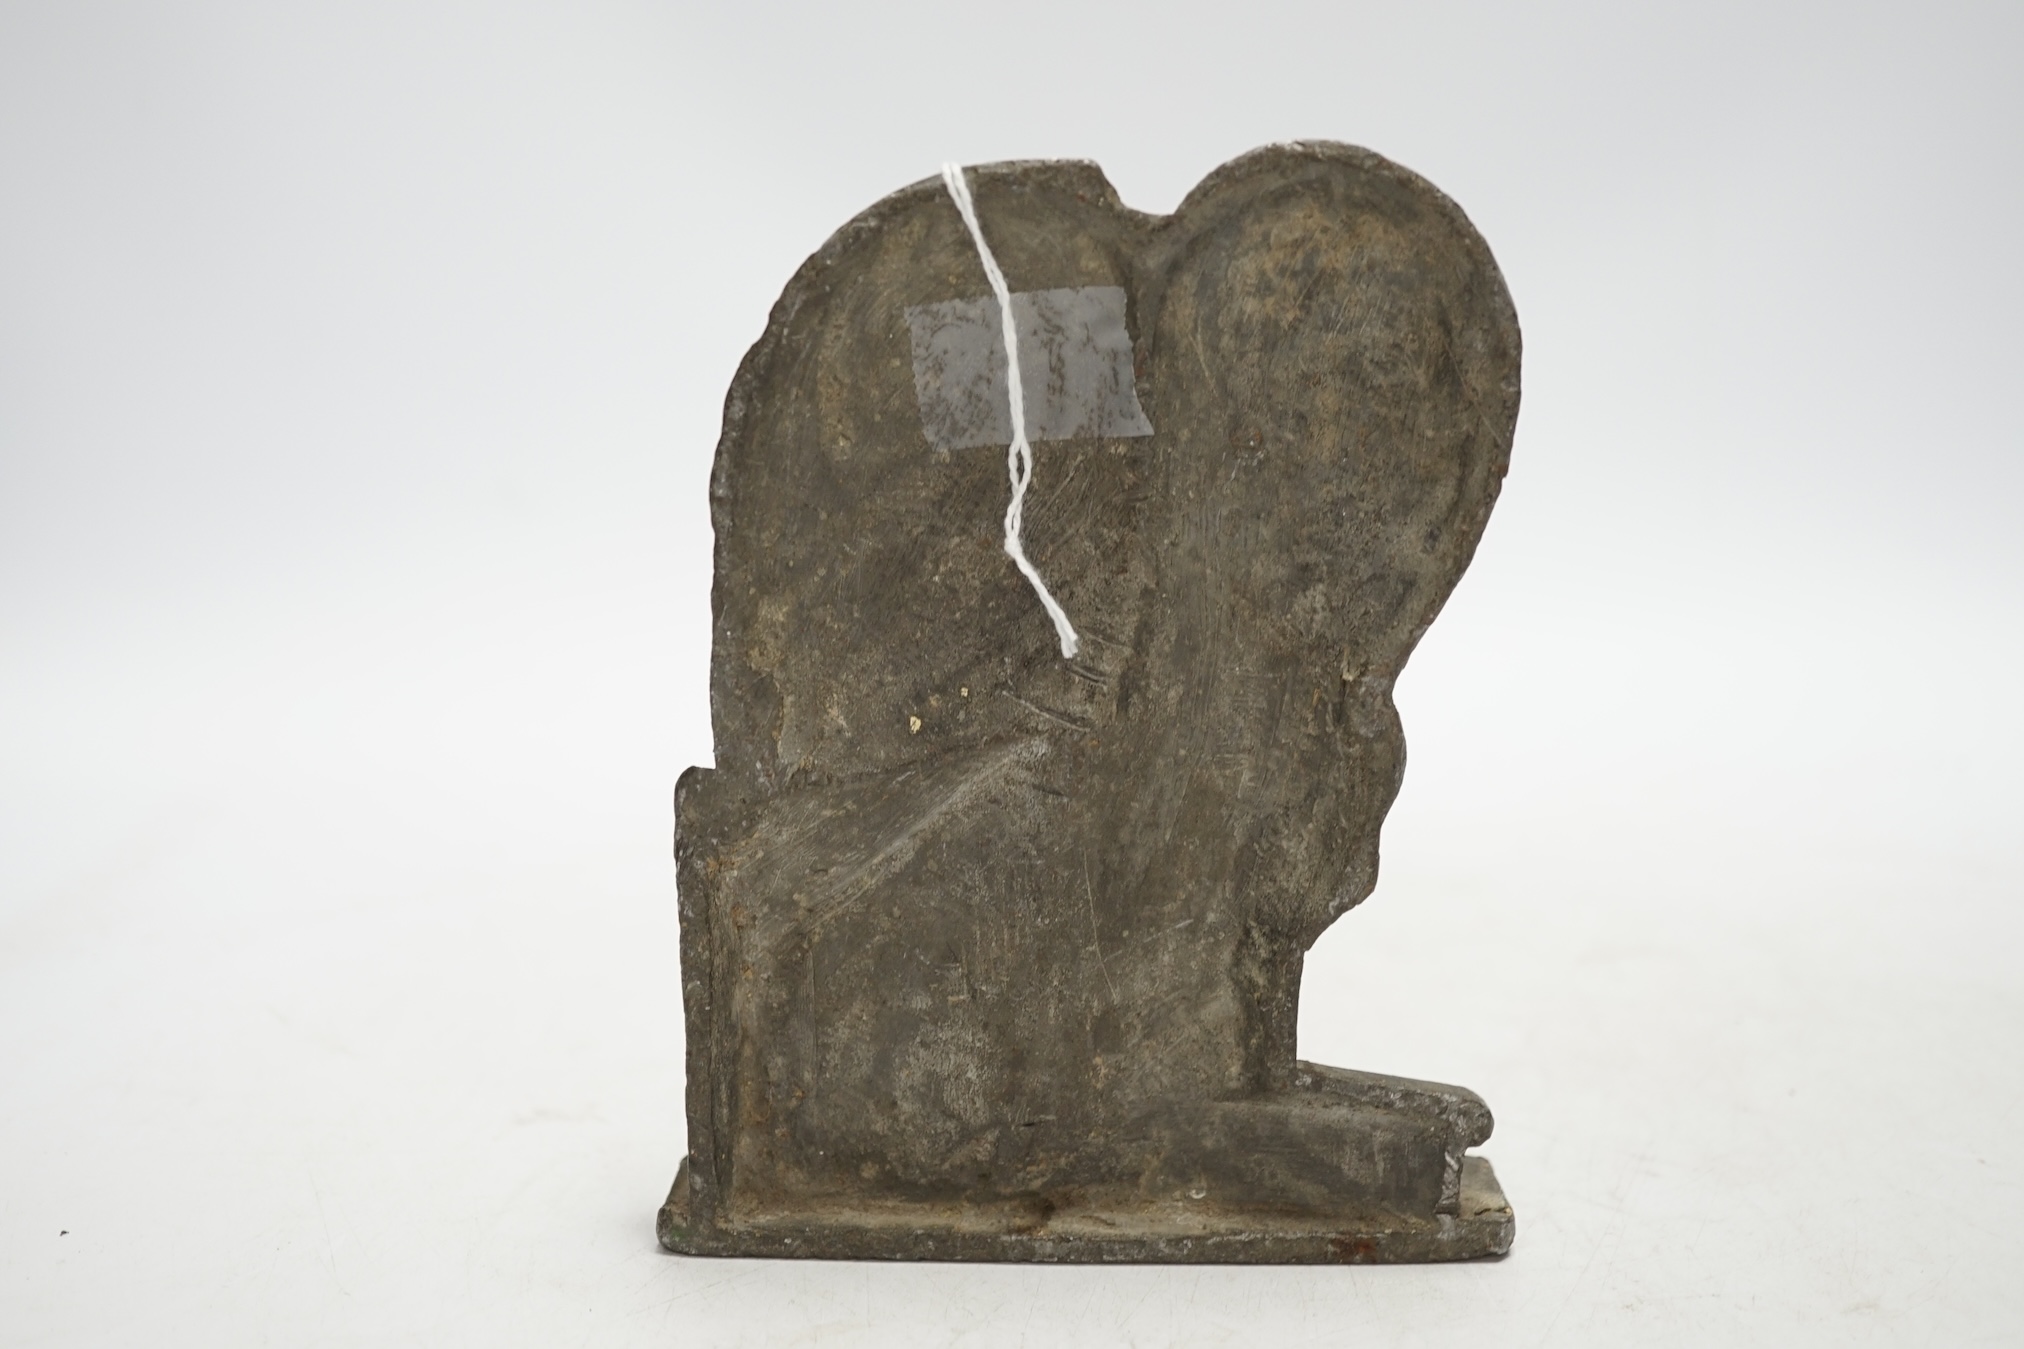 From the Studio of Fred Cuming. A lead study of a crouching figure, 15cm high. Condition - fair